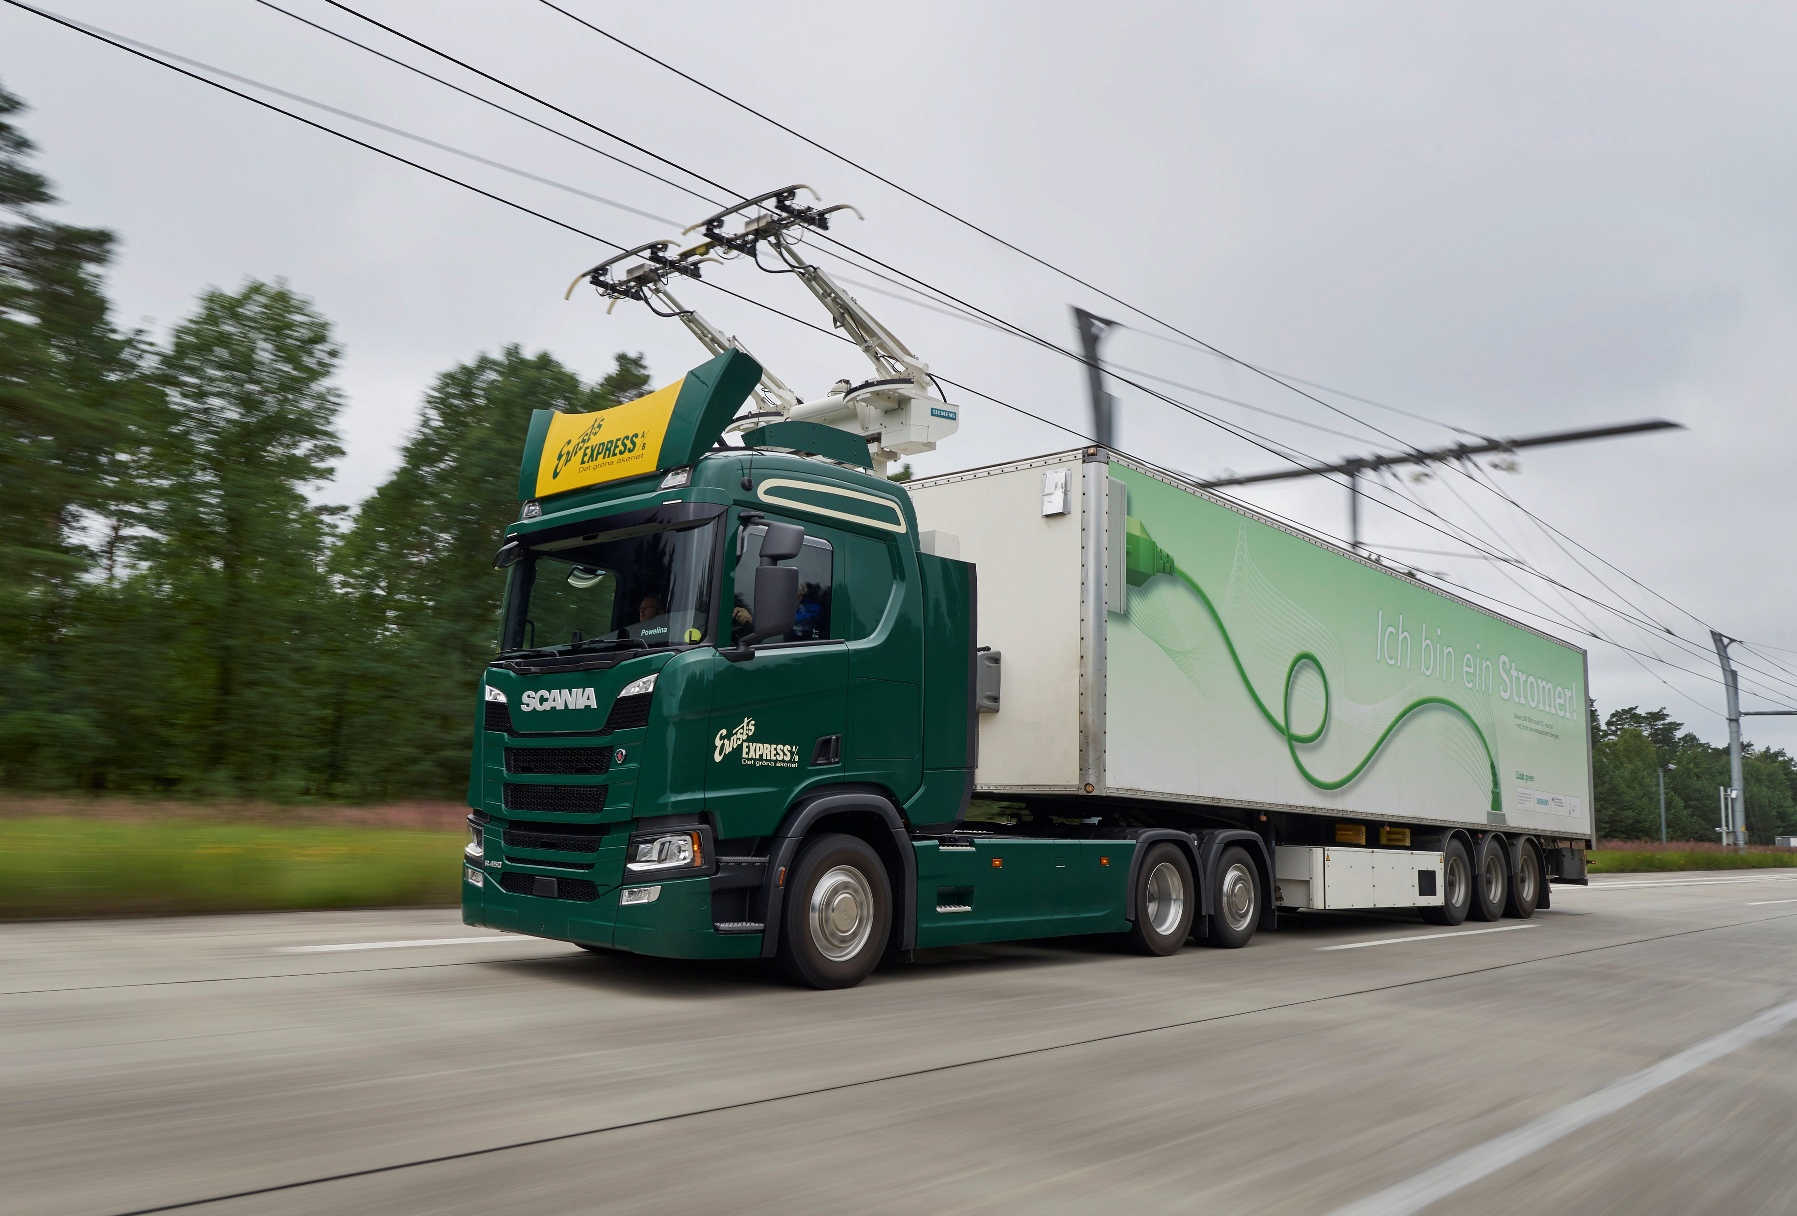 Truck for electric highways project